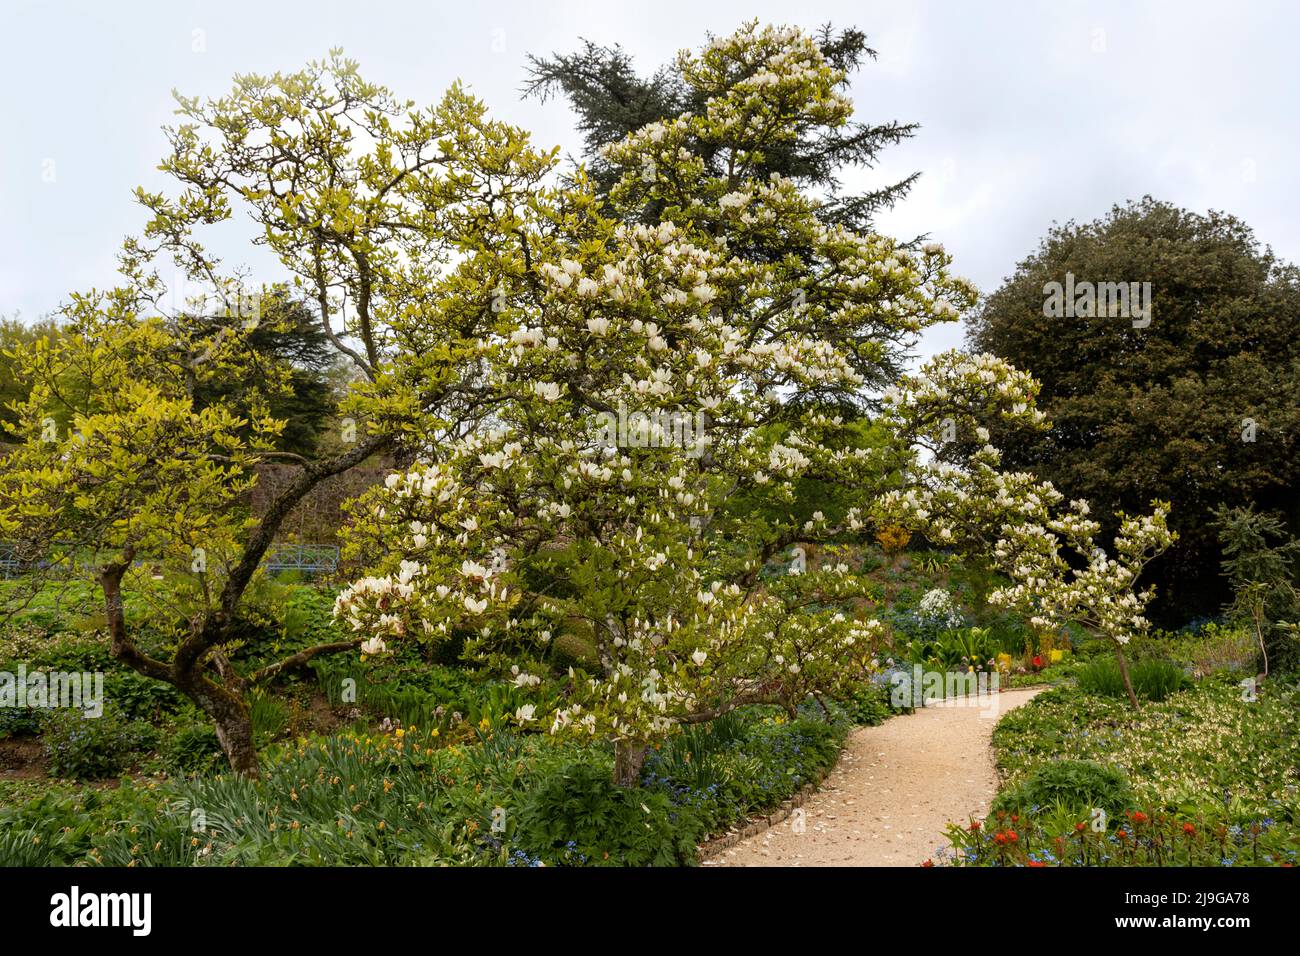 Spring blossoms in Hidcote Manor Garden, Cotswolds, Chipping Camden, Gloucestershire, England, United Kingdom. Stock Photo